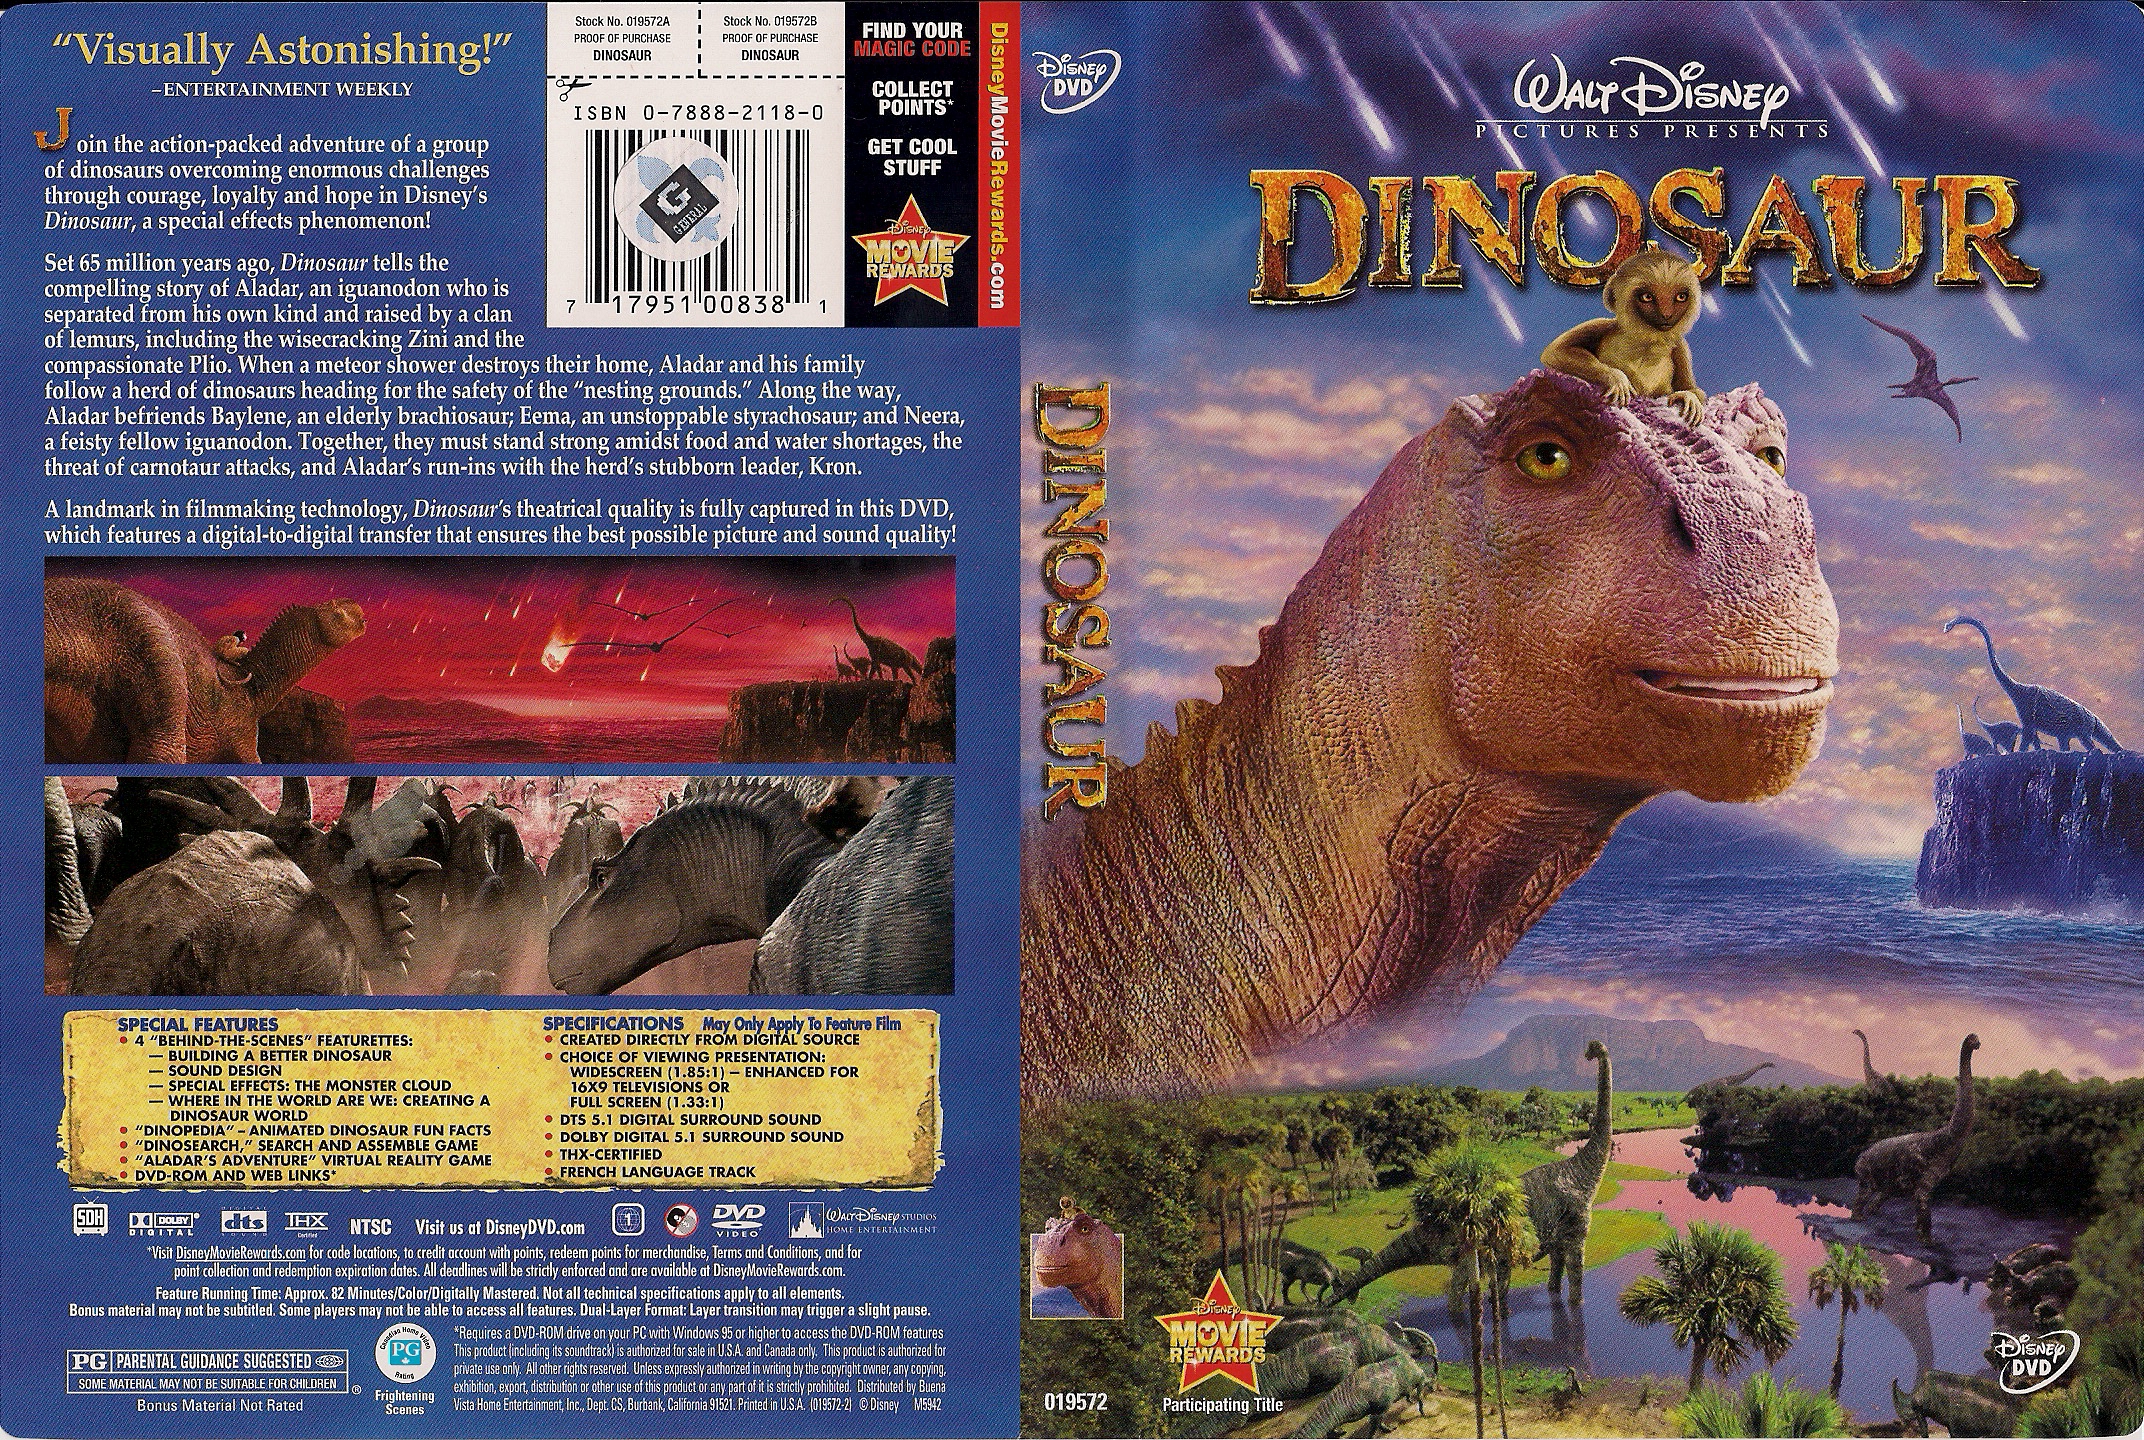 Jaquette DVD Dinosaure (Canadienne)